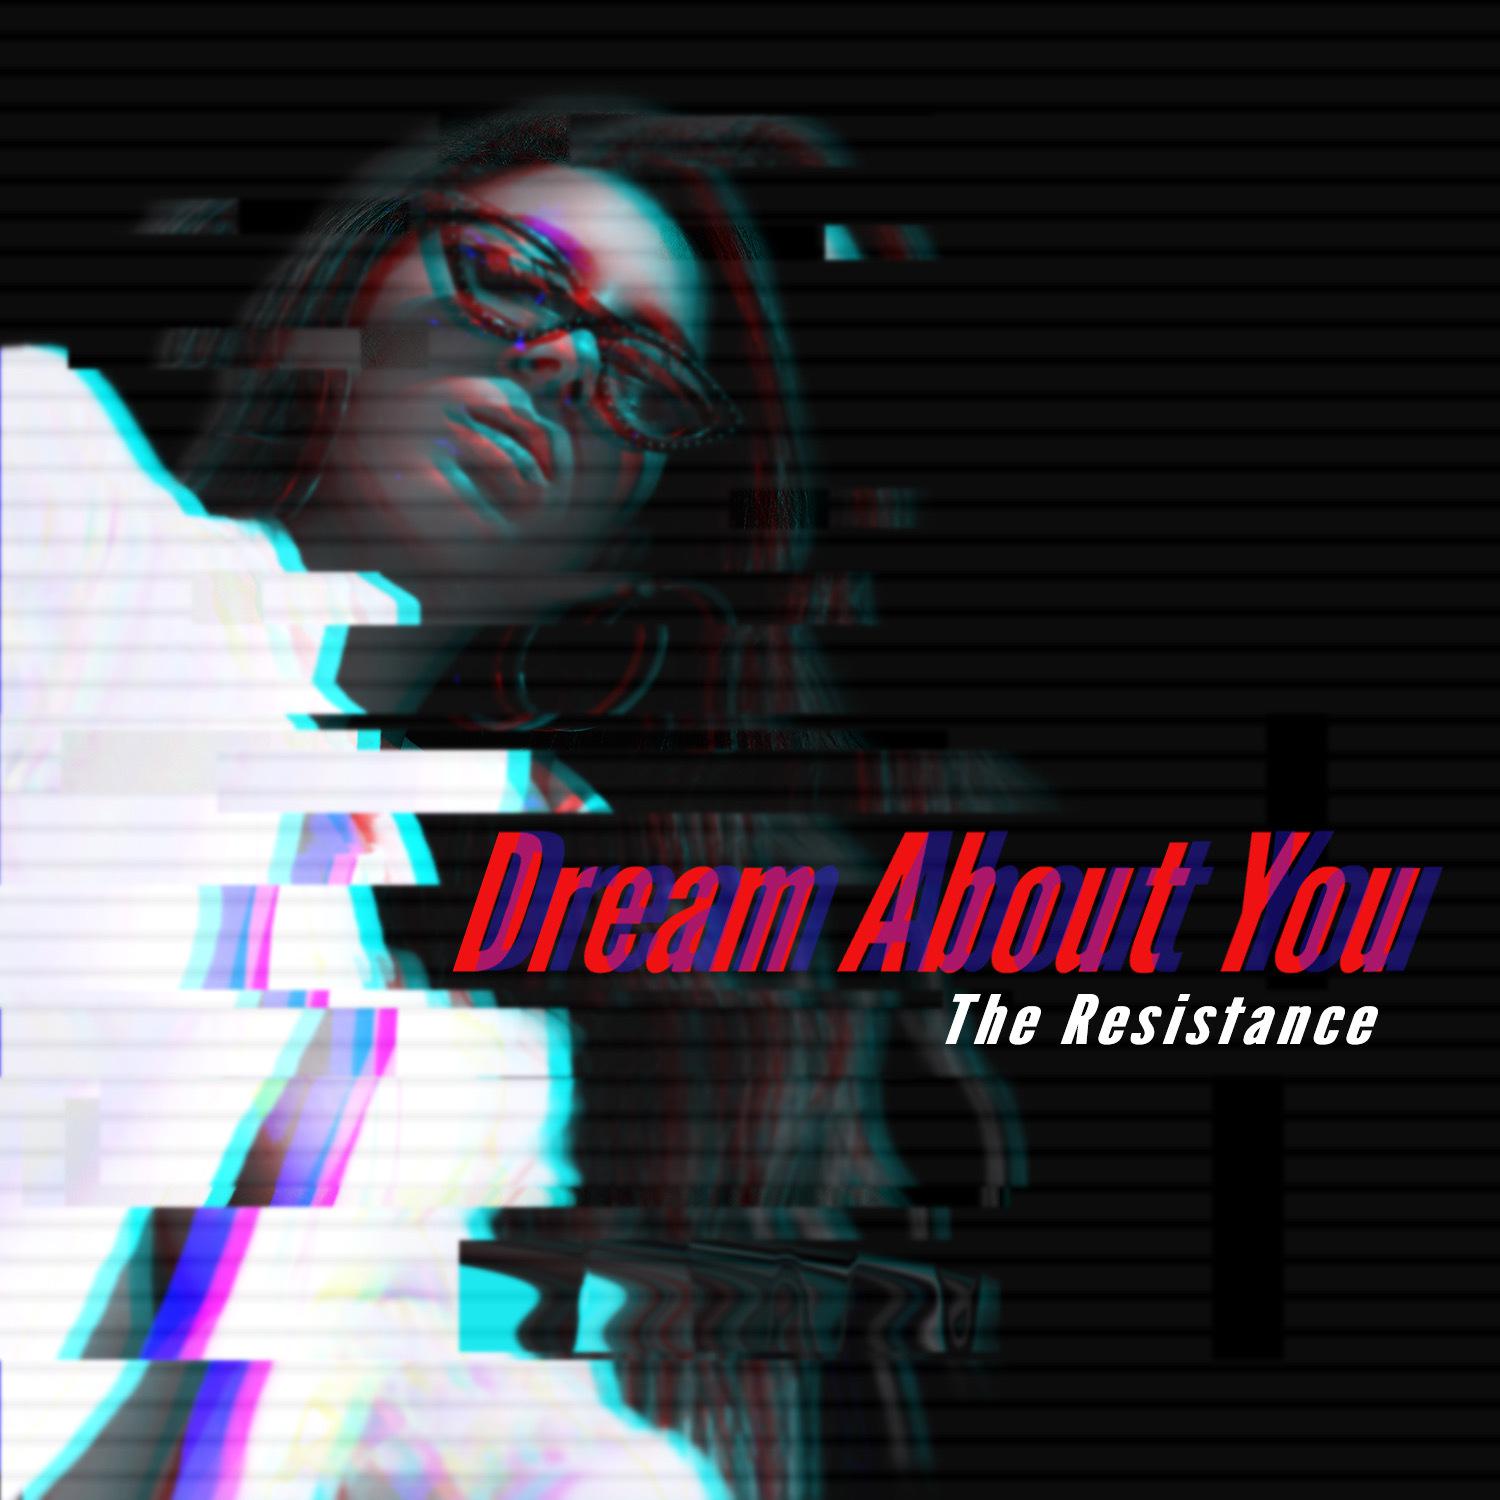 The Resistance - Dream About You